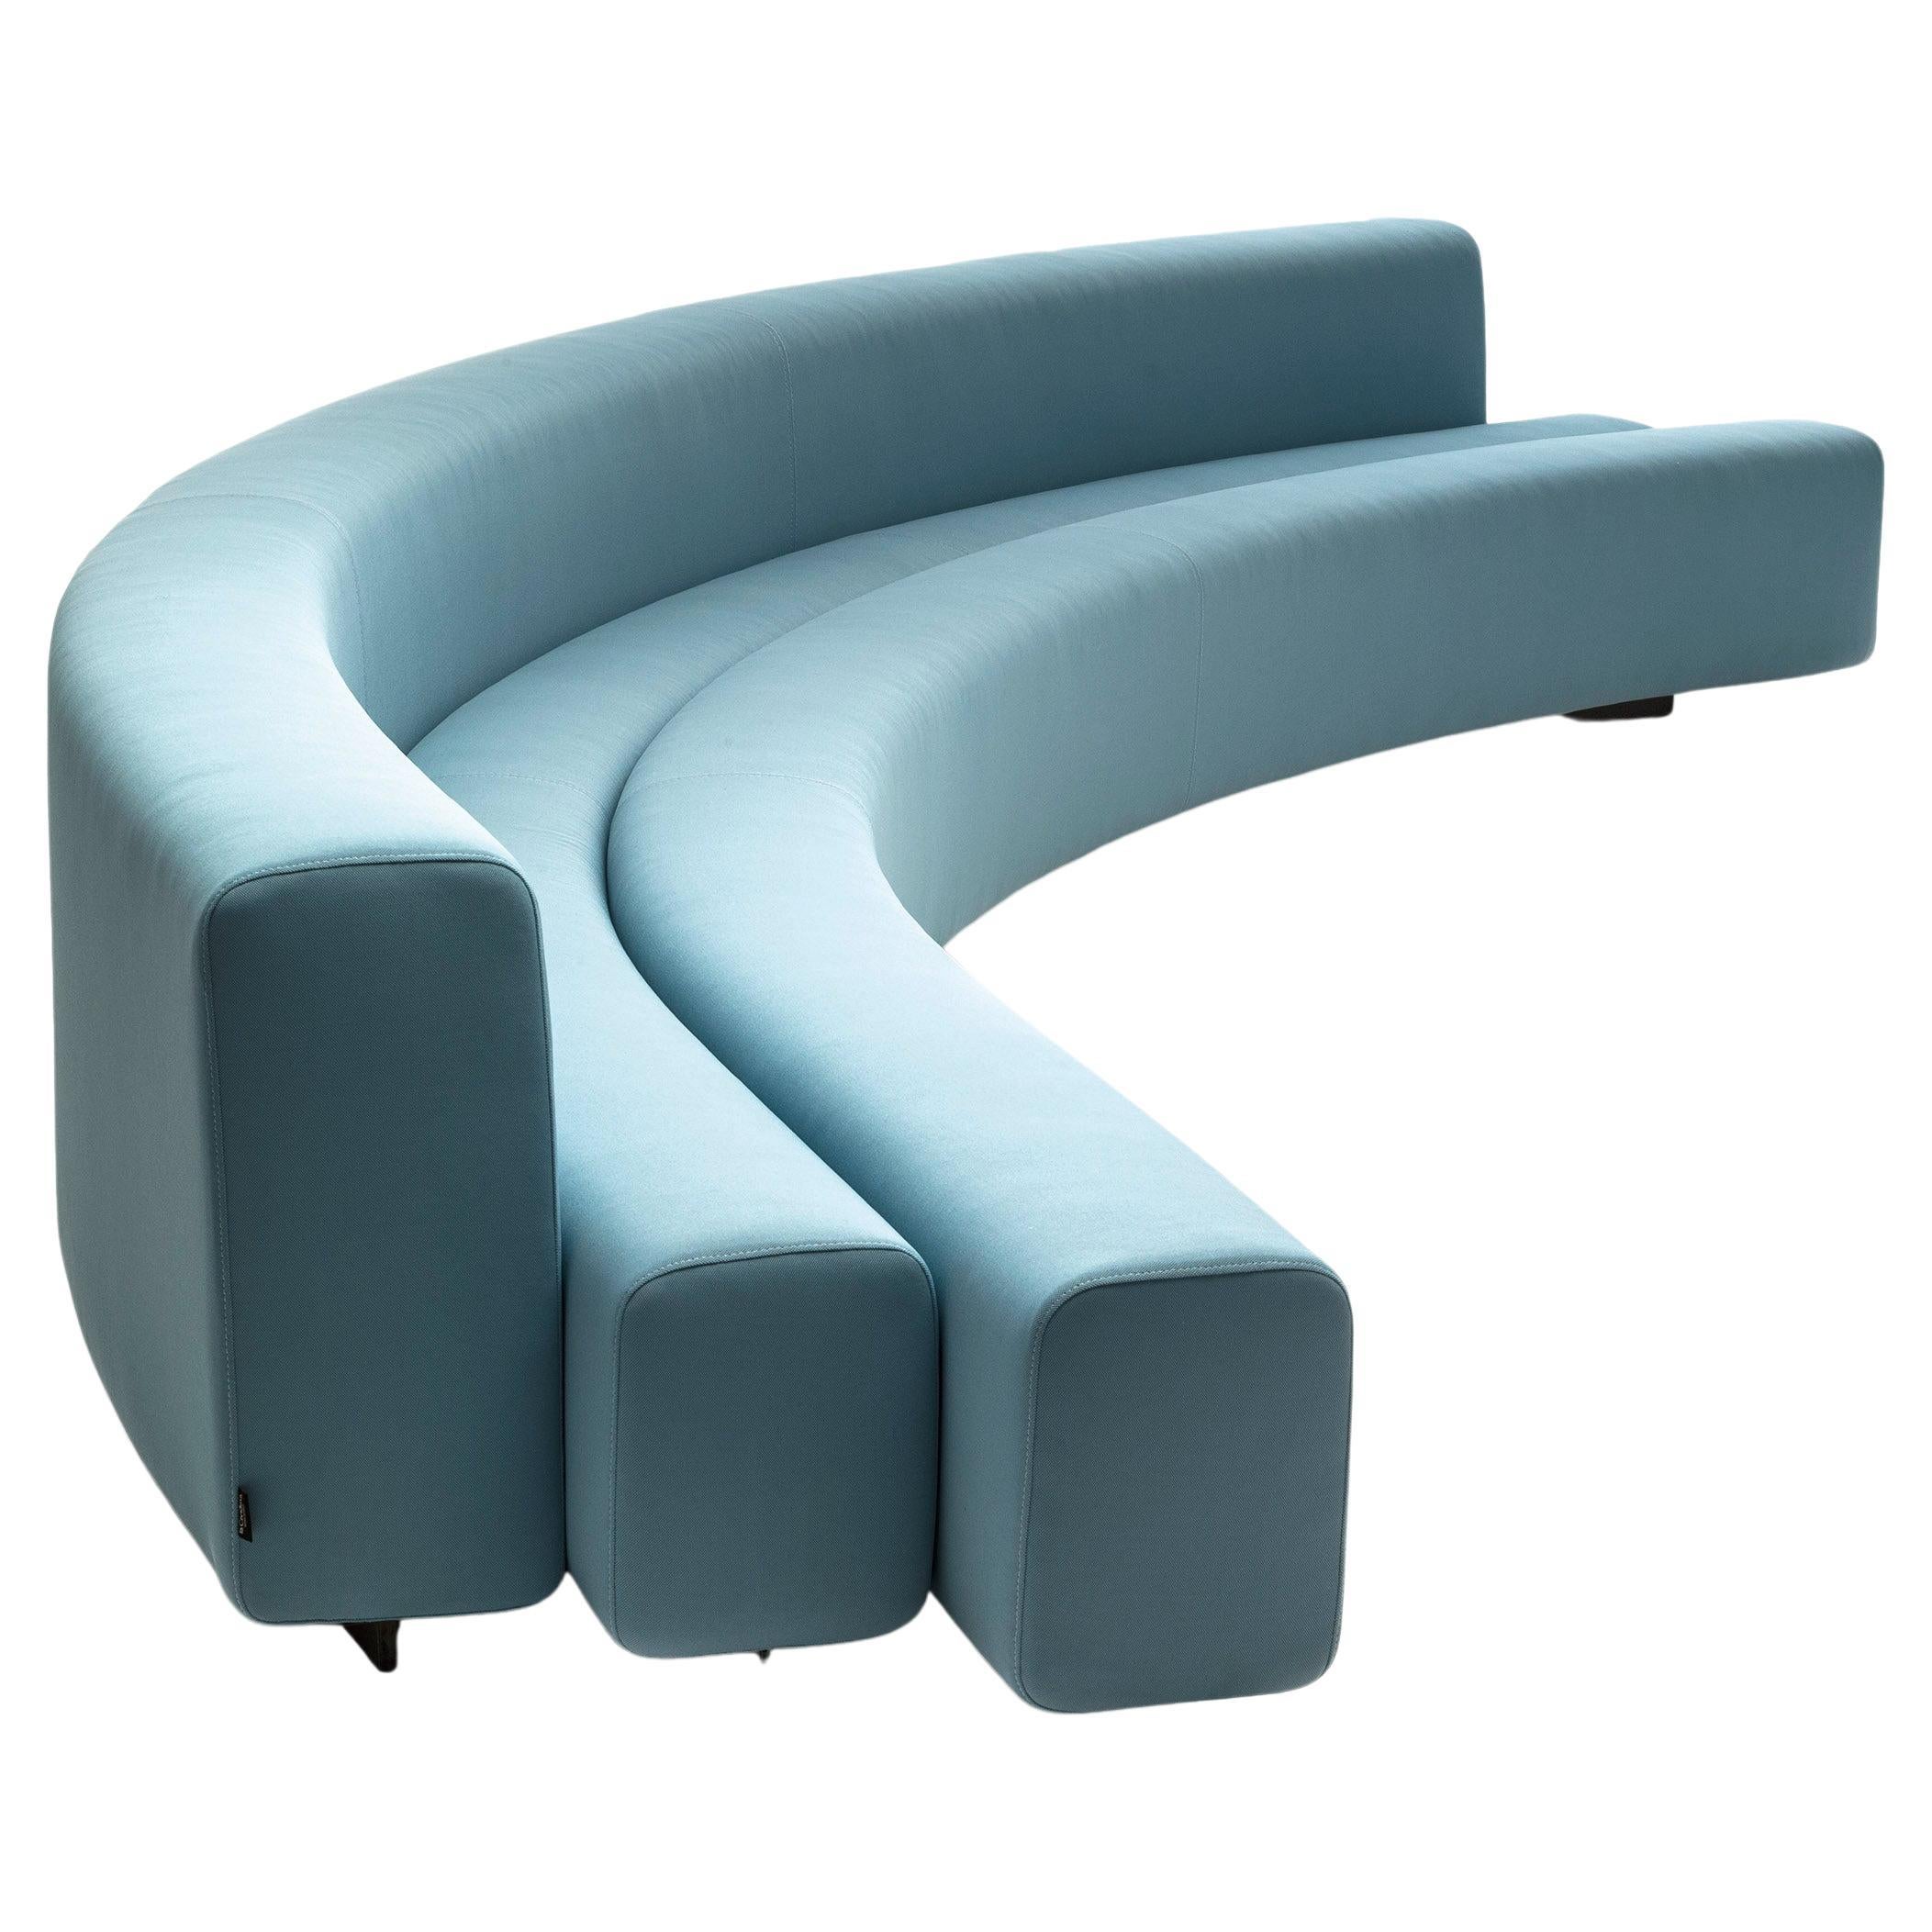 Osaka Small Sofa in Stretchy Blue Upholstery by Pierre Paulin